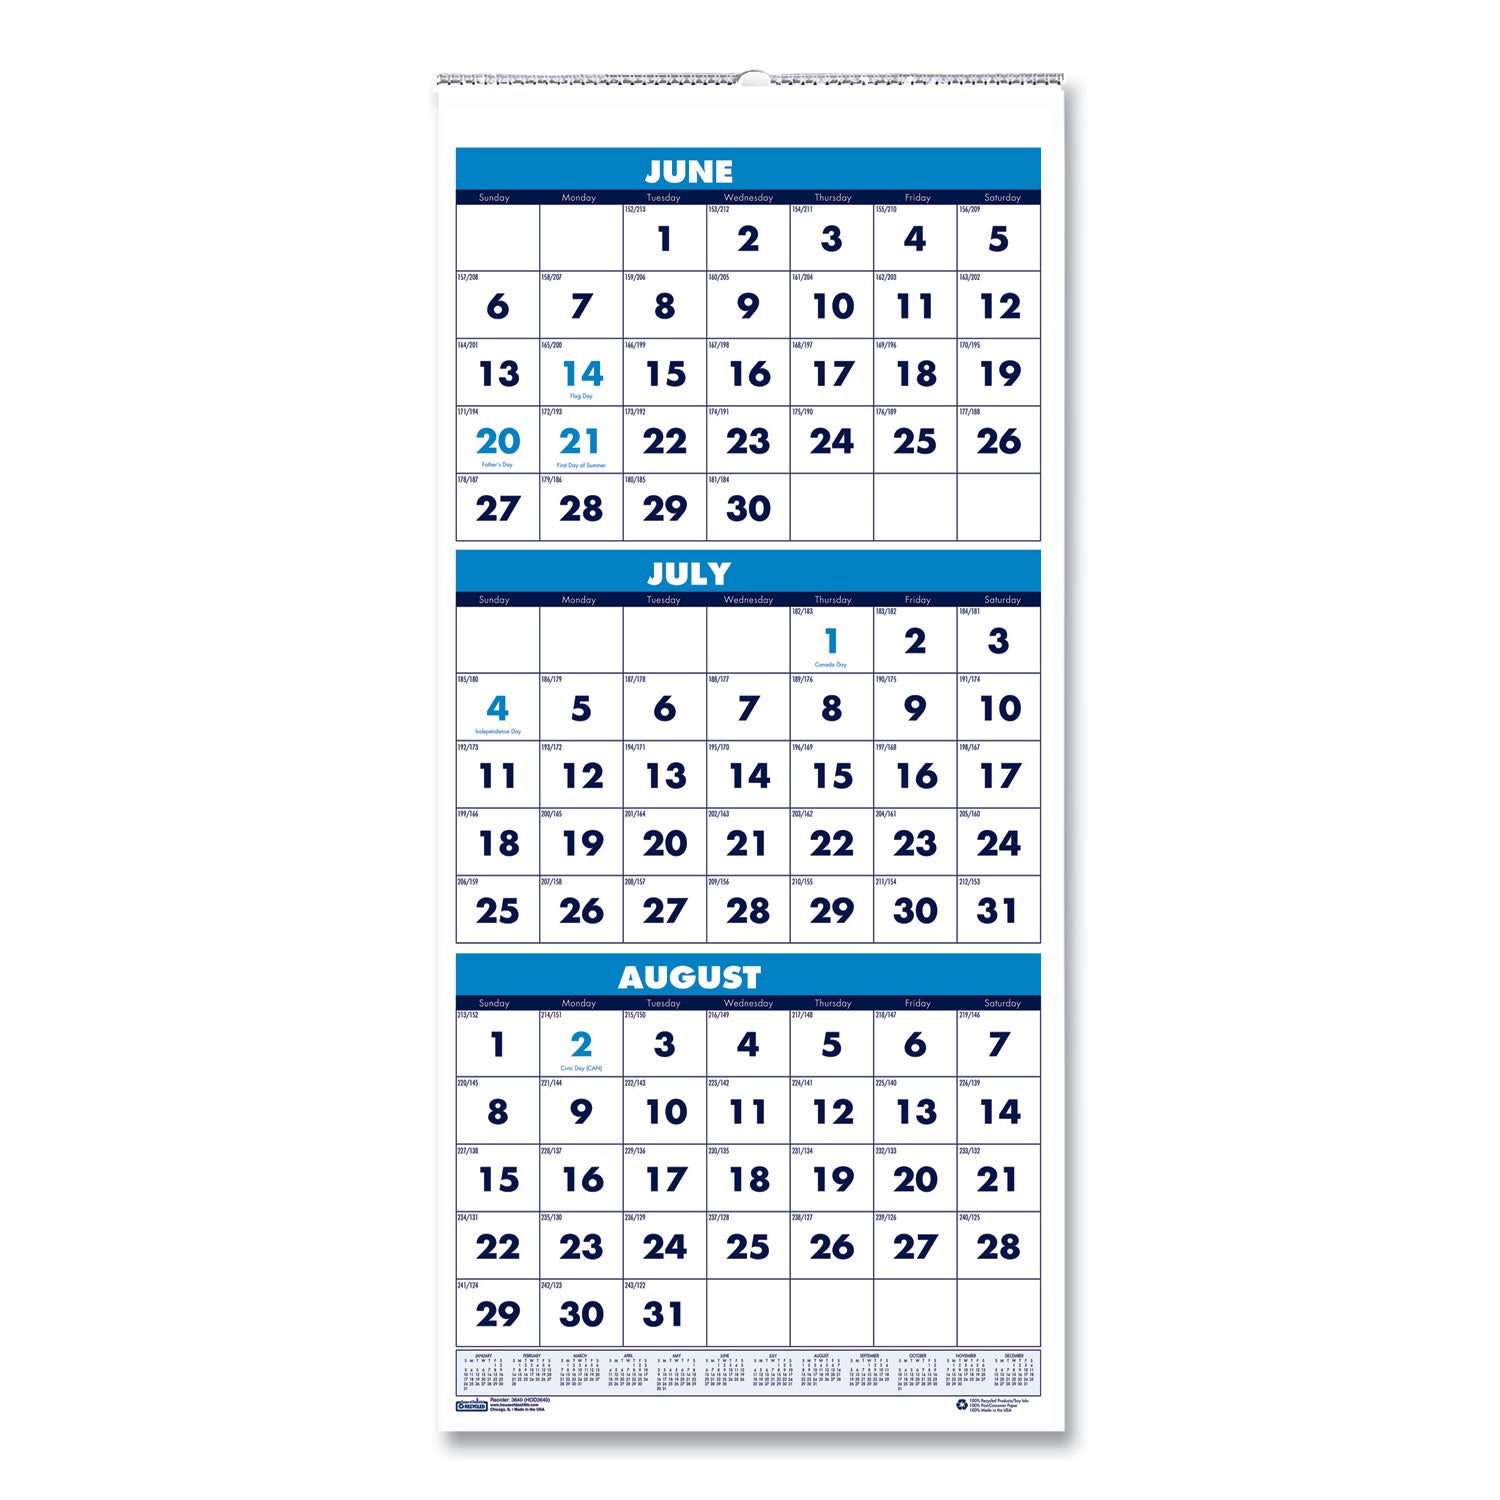 recycled-three-month-format-wall-calendar-vertical-orientation-8-x-17-white-sheets-14-month-june-to-july-2023-to-2024_hod3645 - 1